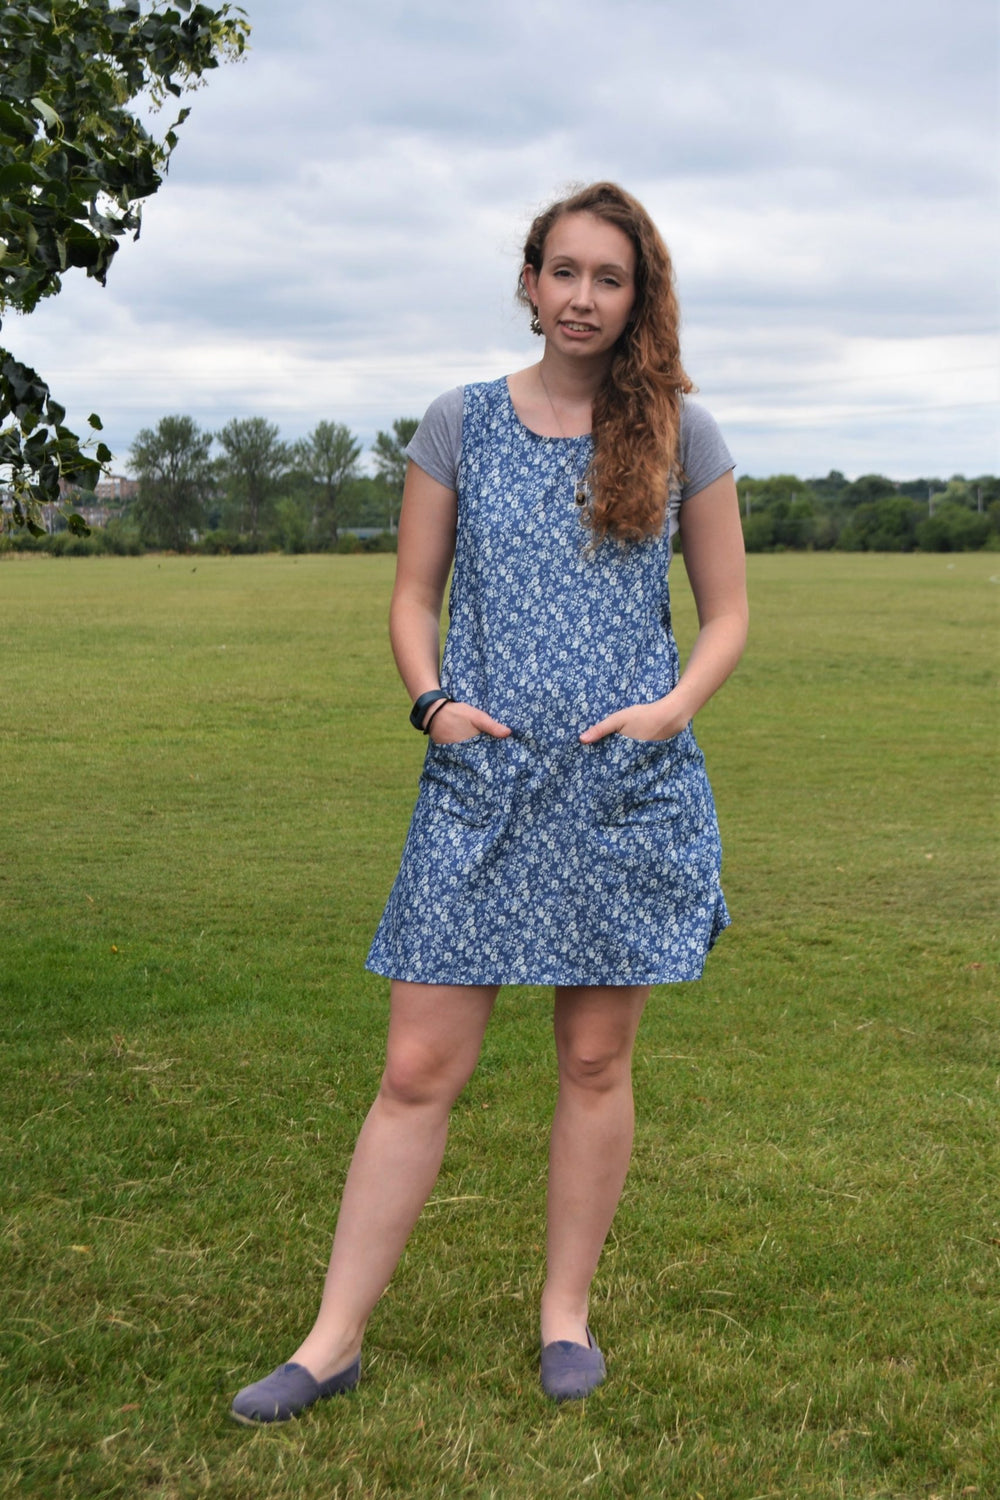 Woman wearing the Everyday Pinafore sewing pattern from Stitched in Wonderland on The Fold Line. A pinafore dress pattern made in cotton poplin, denim, corduroy, linen or wool fabrics, featuring patch pockets, mini length hem, relaxed fit, A-line shape an